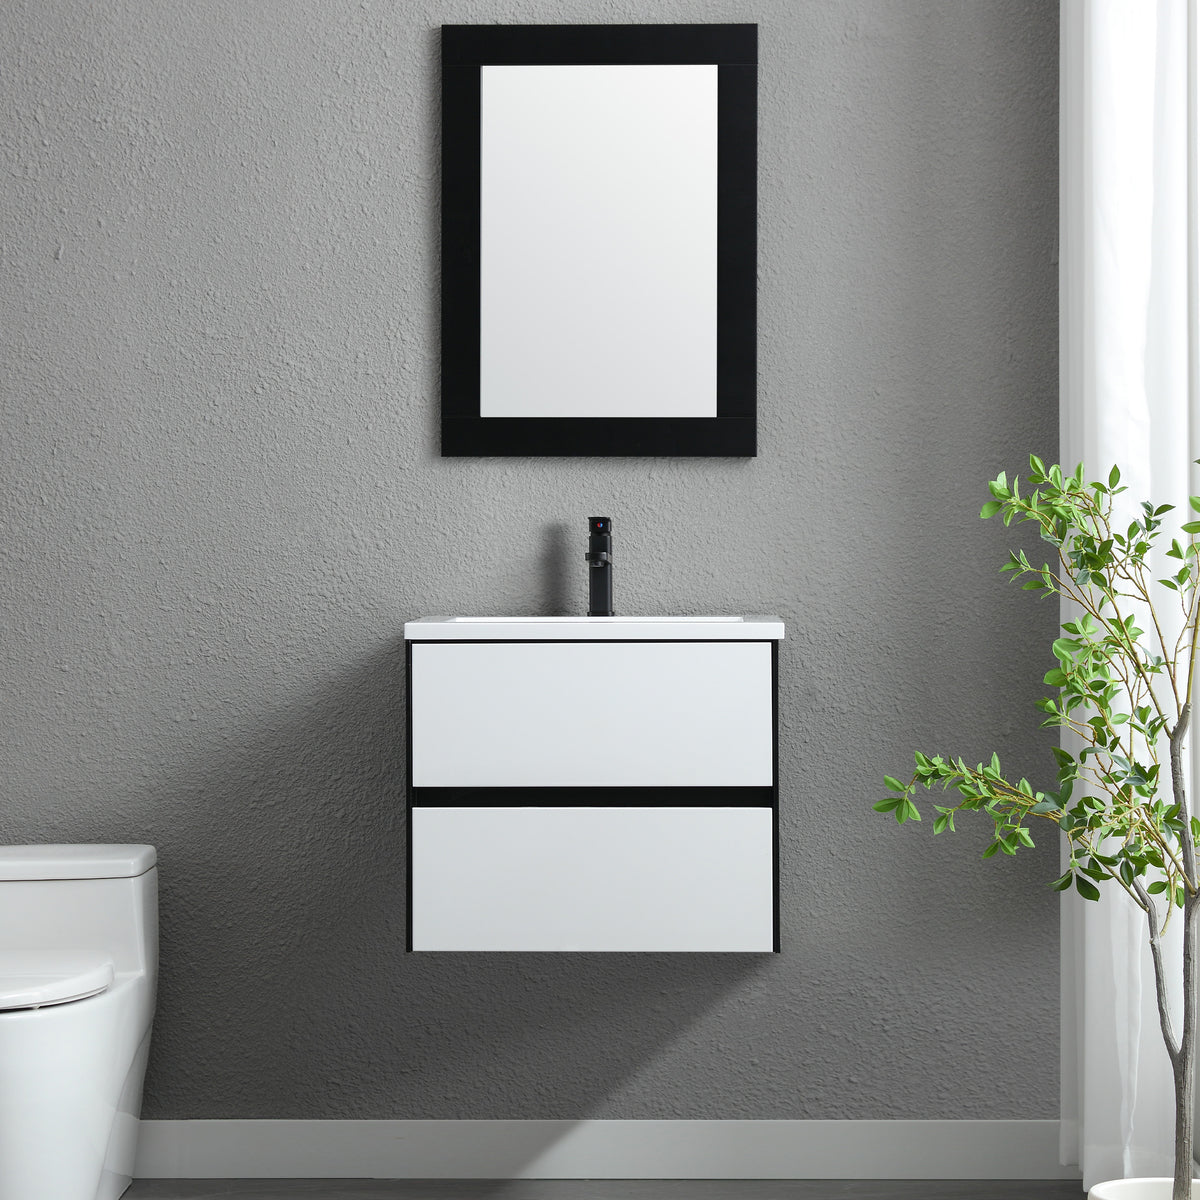 Eclife 24"/30" Wall Mounted Floating Bathroom Cabinet with Colors Mixed Style, 2 Big Drawers and Matte Black Faucet